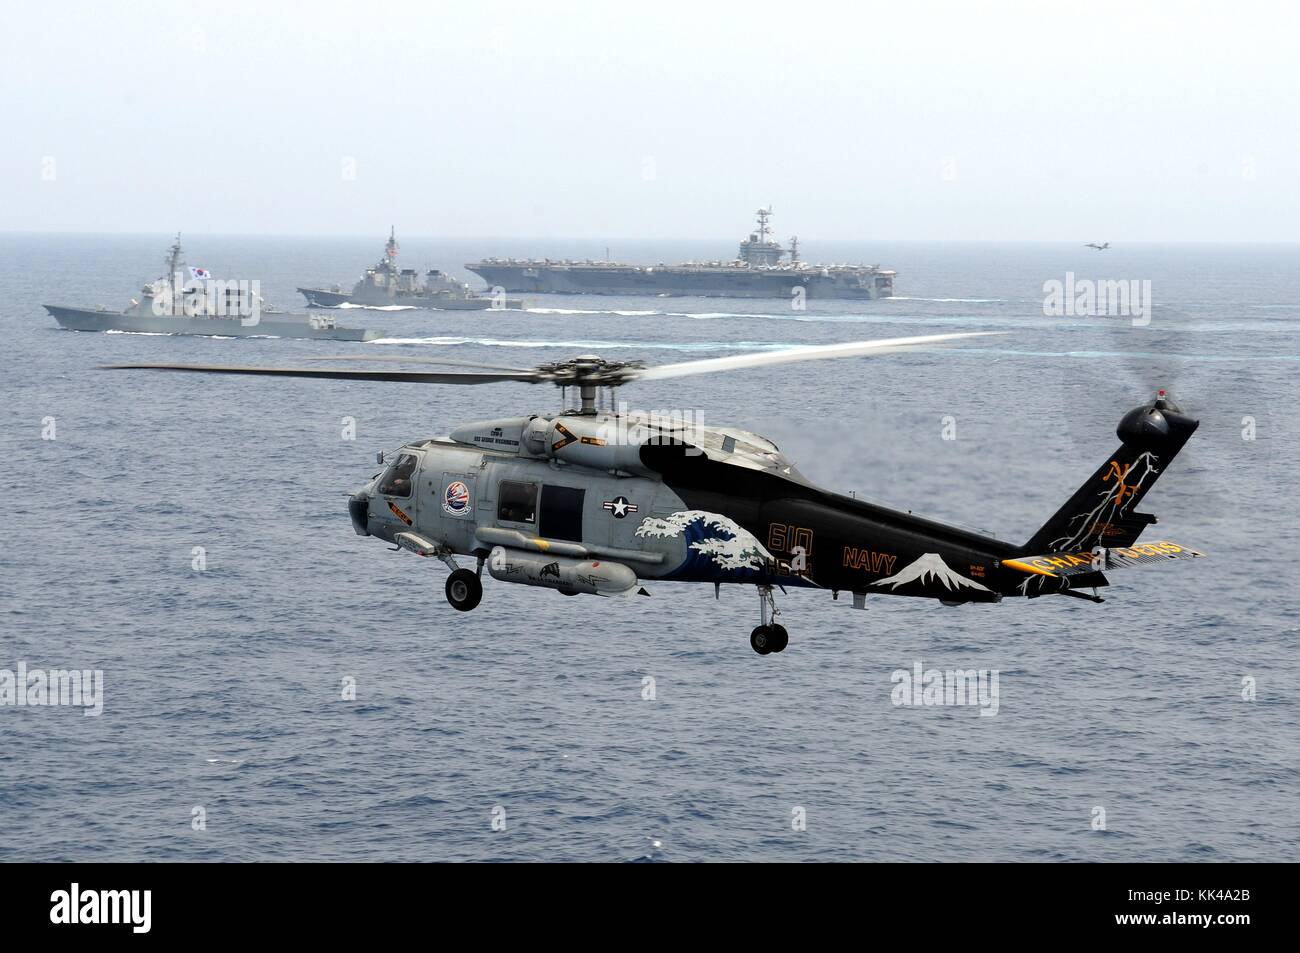 An SH-60F Seahawk helicopter, assigned to the Chargers of Helicopter Anti-Submarine Squadron HS 14, is airborne while the aircraft carrier USS George Washington CVN 73, the Japan Maritime Self-Defense Force destroyer JS Kirishima DD 174, and the Republic of Korea navy destroyer ROKS Sejong the Great DDG 991 participate a trilateral event, East China Sea, 2012. Image courtesy Mass Communication Specialist 1st Class Jennifer A. Villalovos/US Navy. Stock Photo